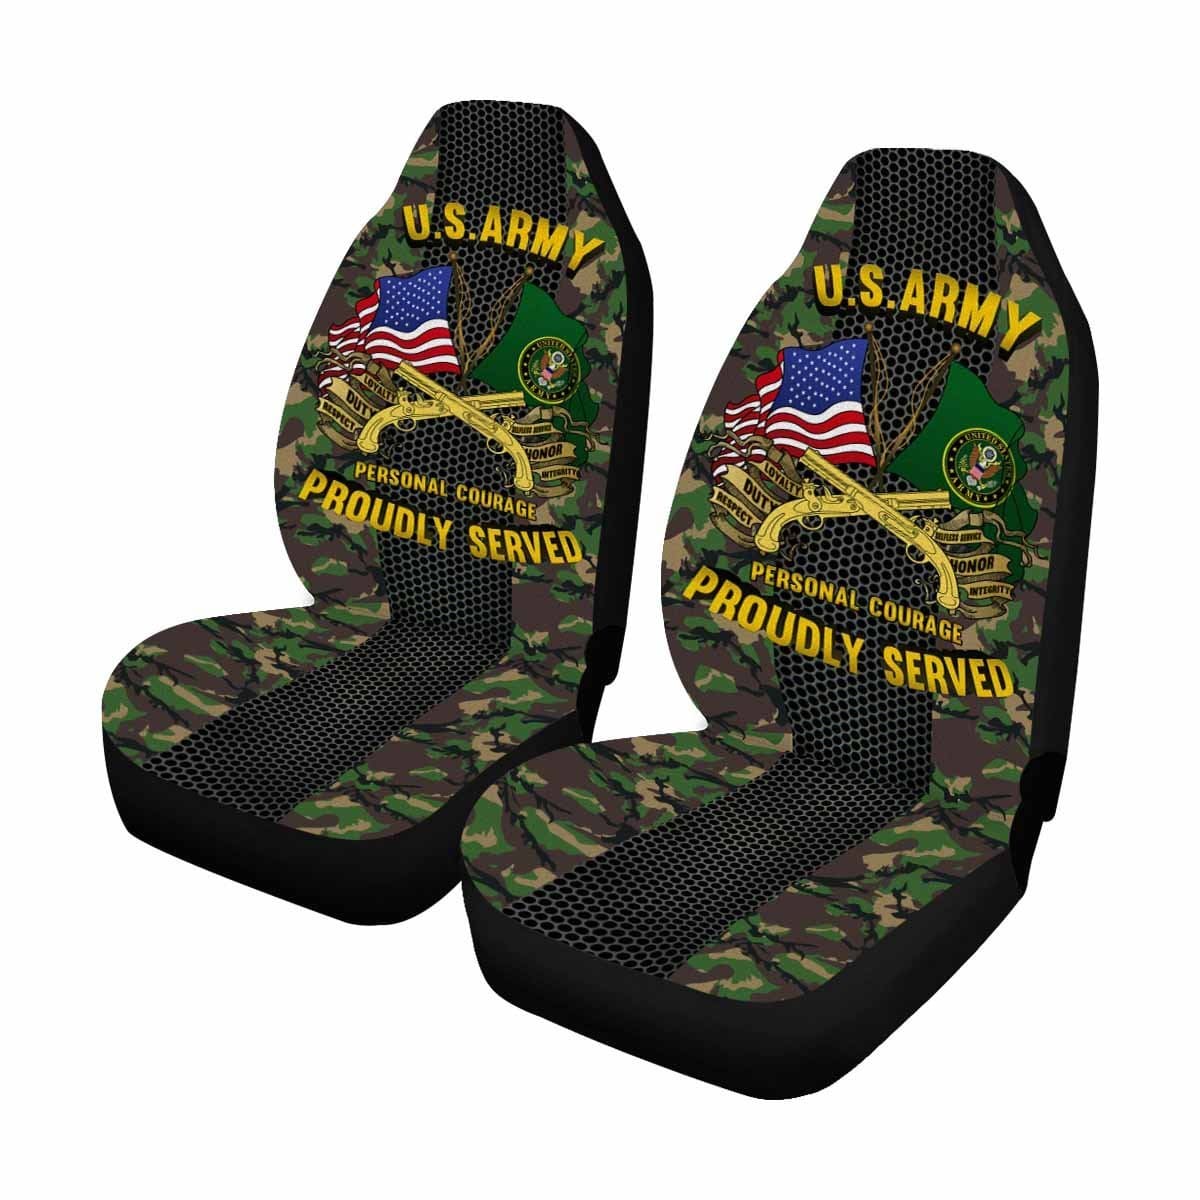 U.S. Army Military Police Corps Car Seat Covers (Set of 2)-SeatCovers-Army-Branch-Veterans Nation